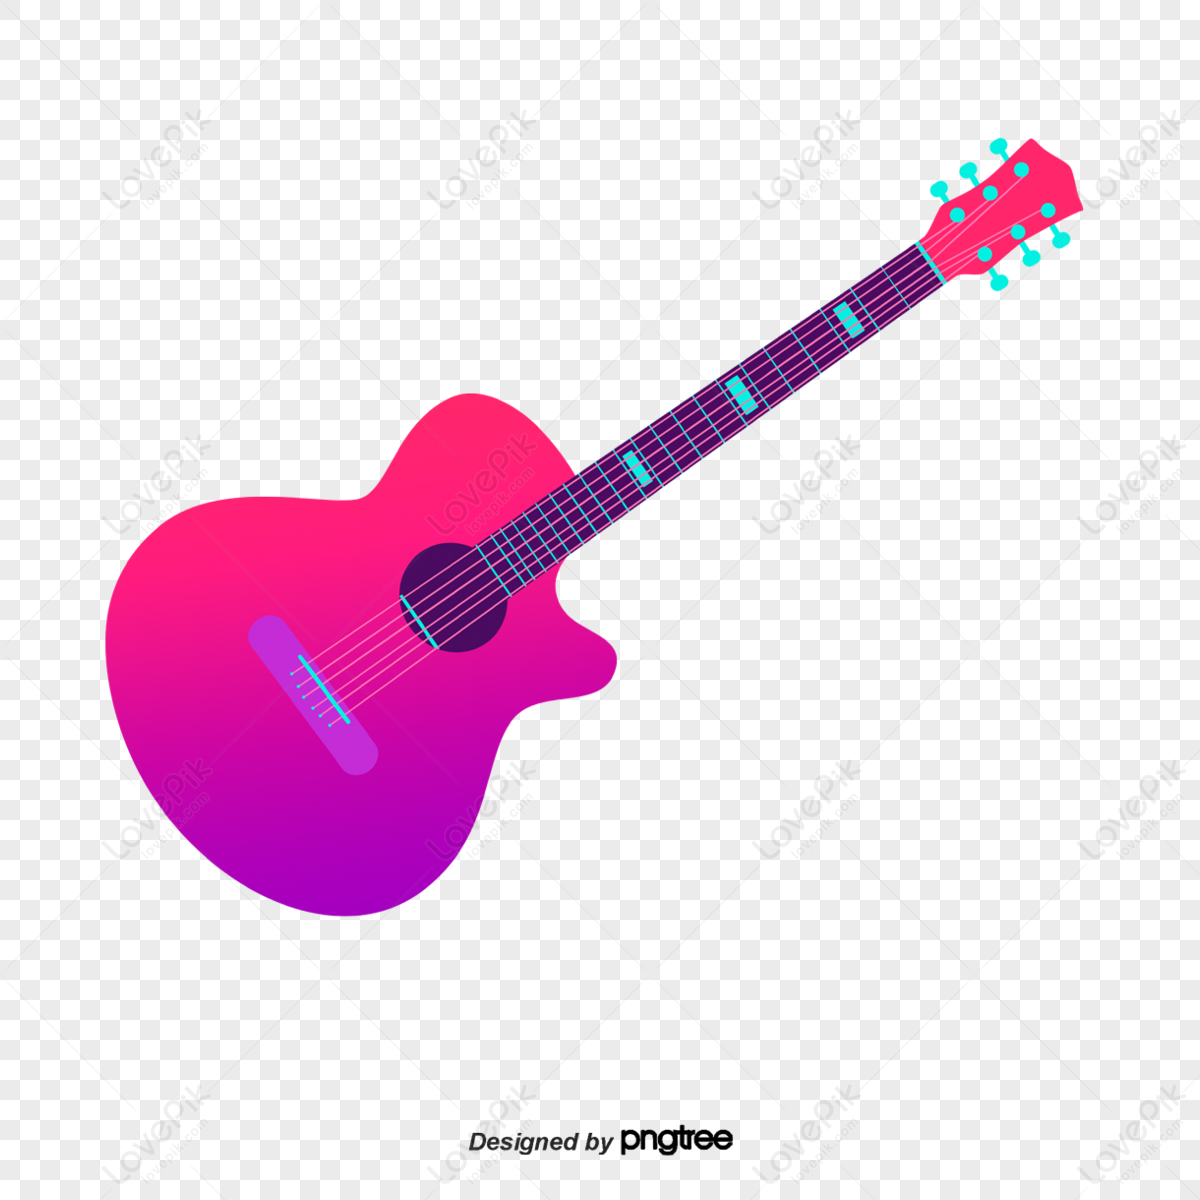 Pink Electric Guitar PNG Images With Transparent Background | Free ...